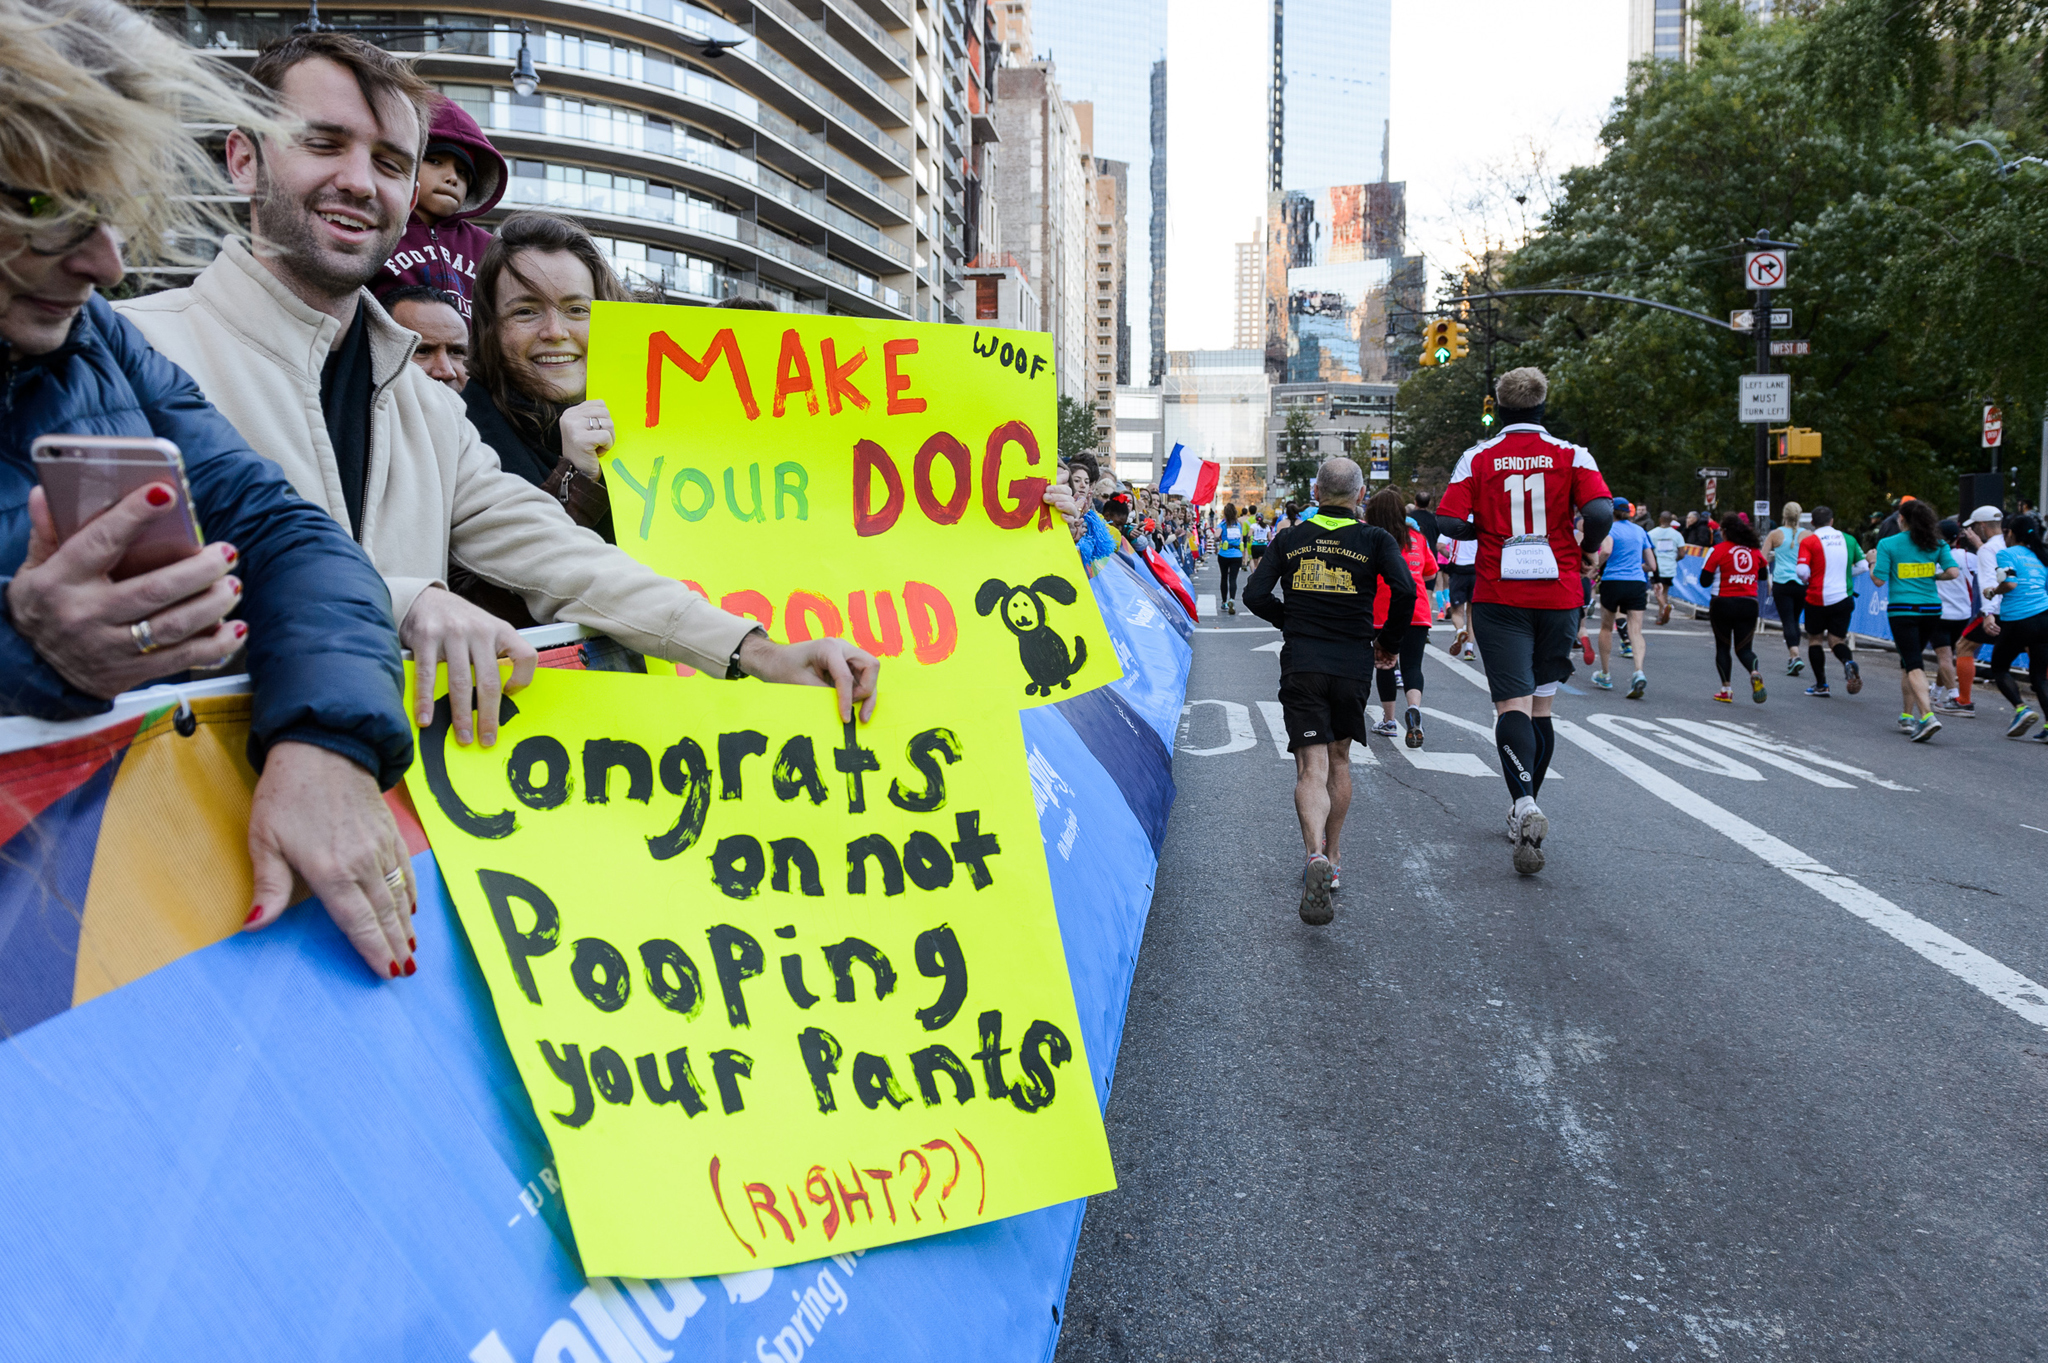 33 photos of funny marathon signs from the 2016 TCS NYC Marathon